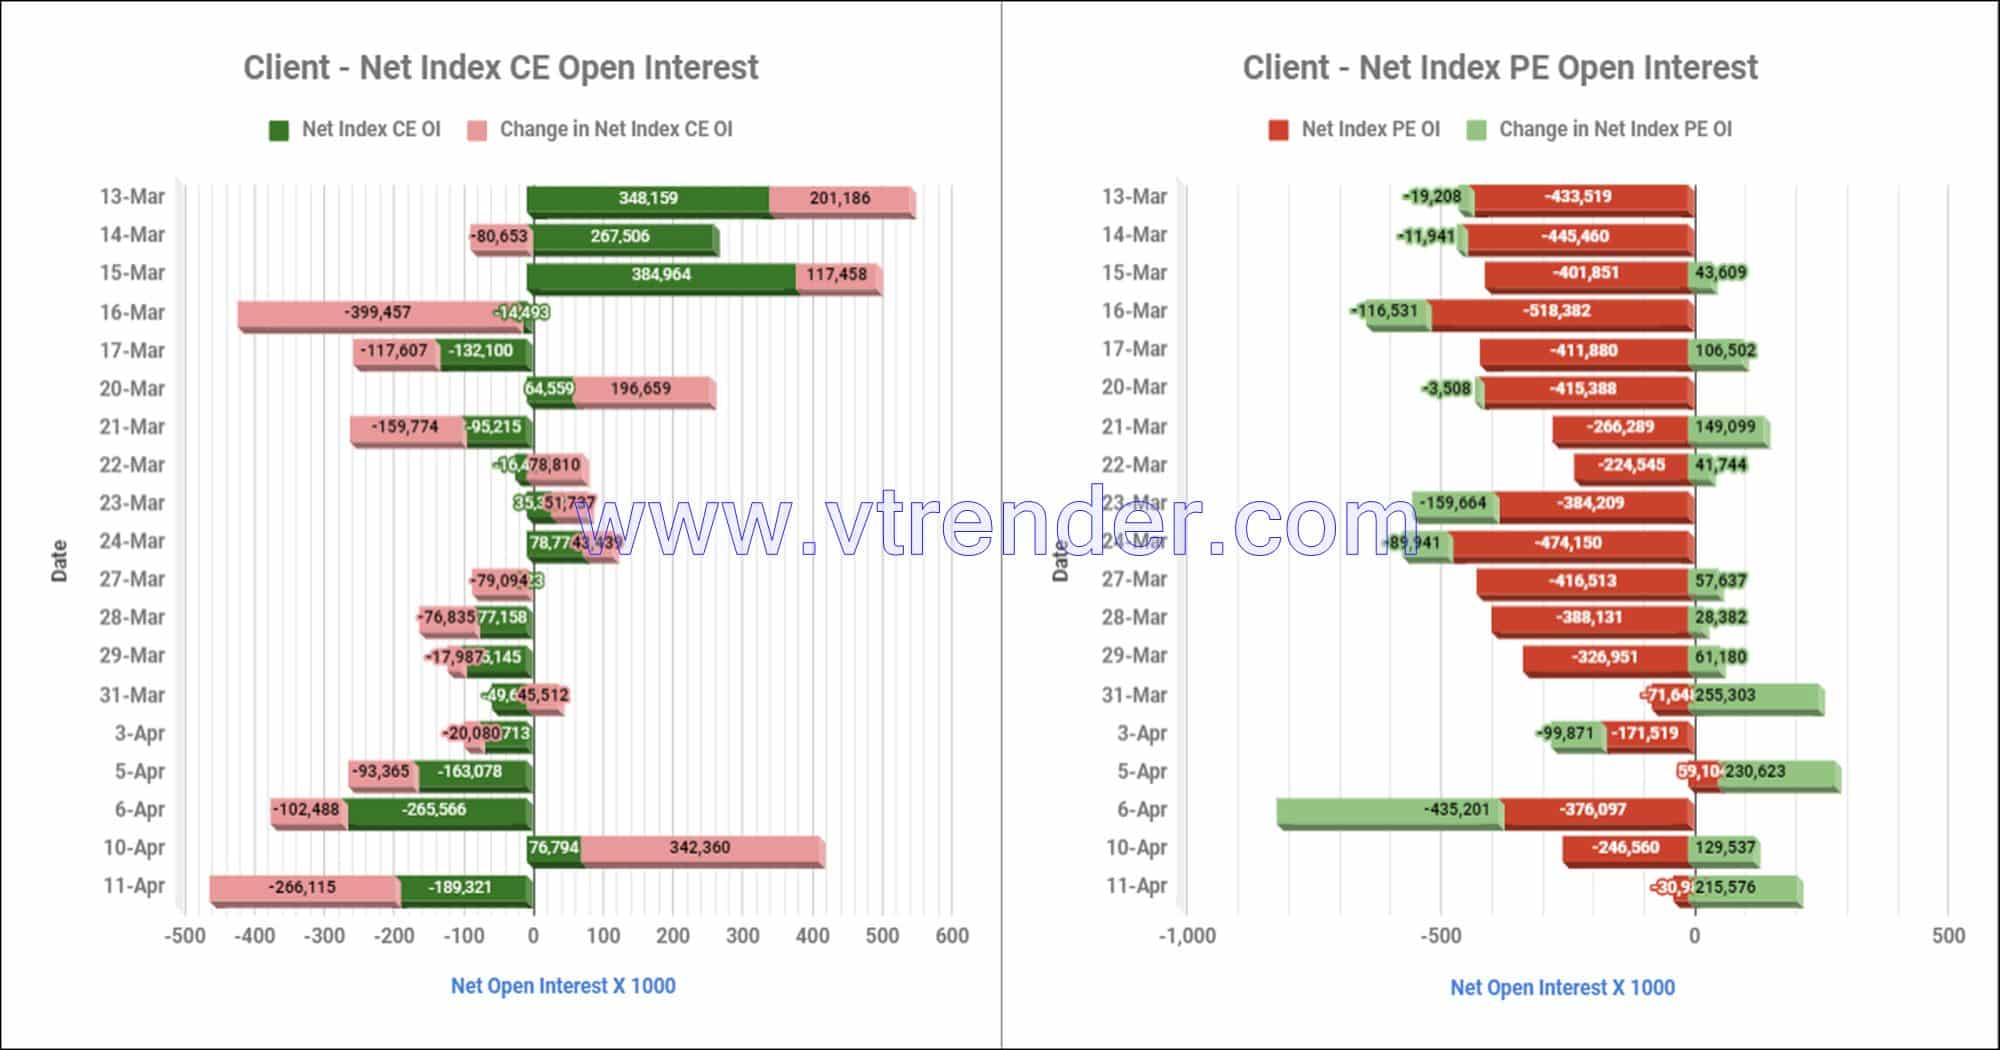 Clientinop11Apr Participantwise Net Open Interest And Net Equity Investments – 11Th Apr 2023 Client, Equity, Fii, Index Futures, Index Options, Open Interest, Prop